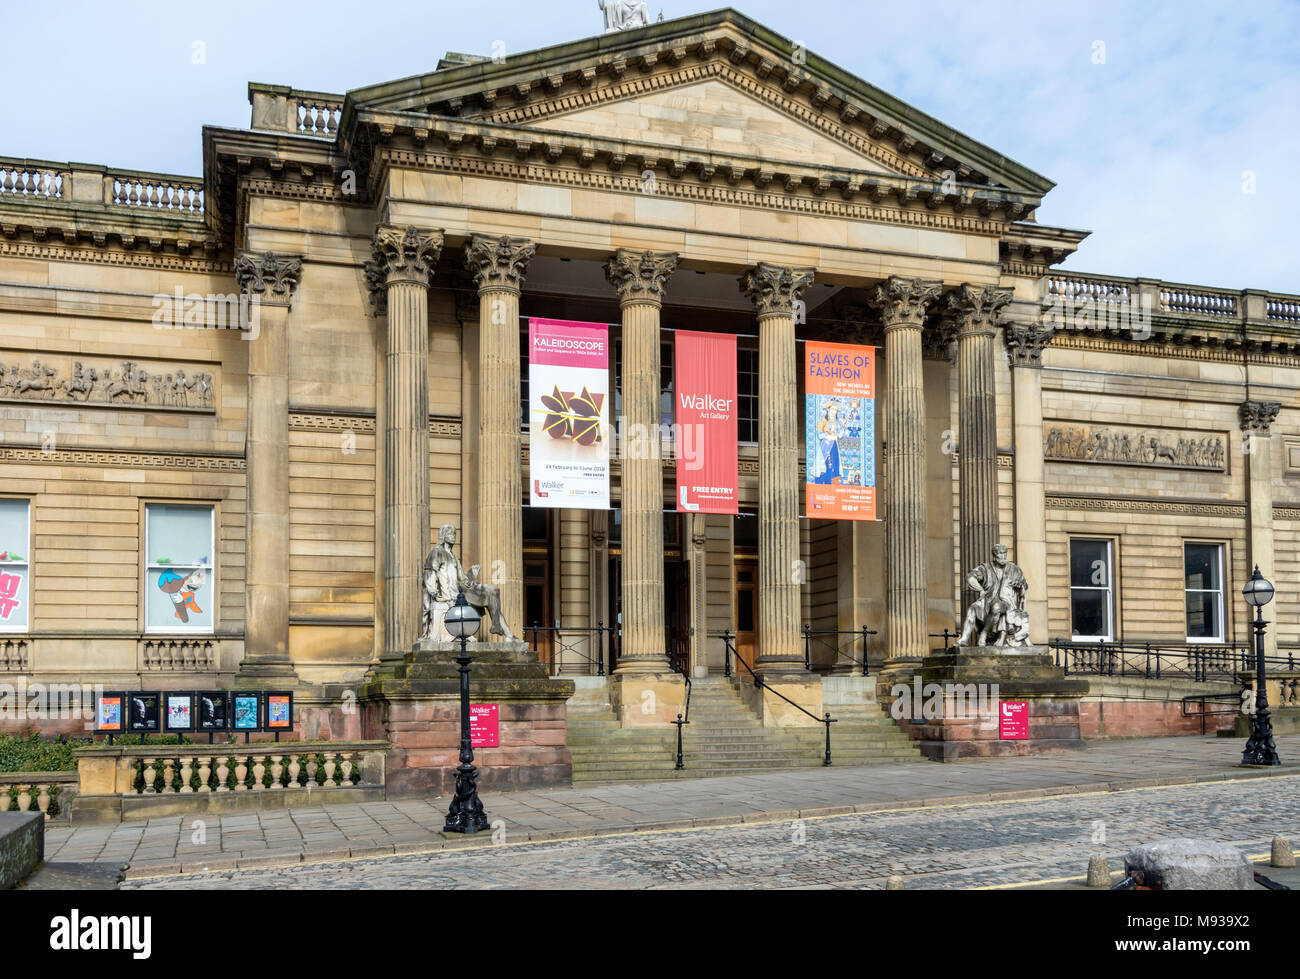 The Walker Art Gallery.   By Cornelius Sherlock and H. H. Vale, 1877.  William Brown Street, Liverpool, England, UK Stock Photo